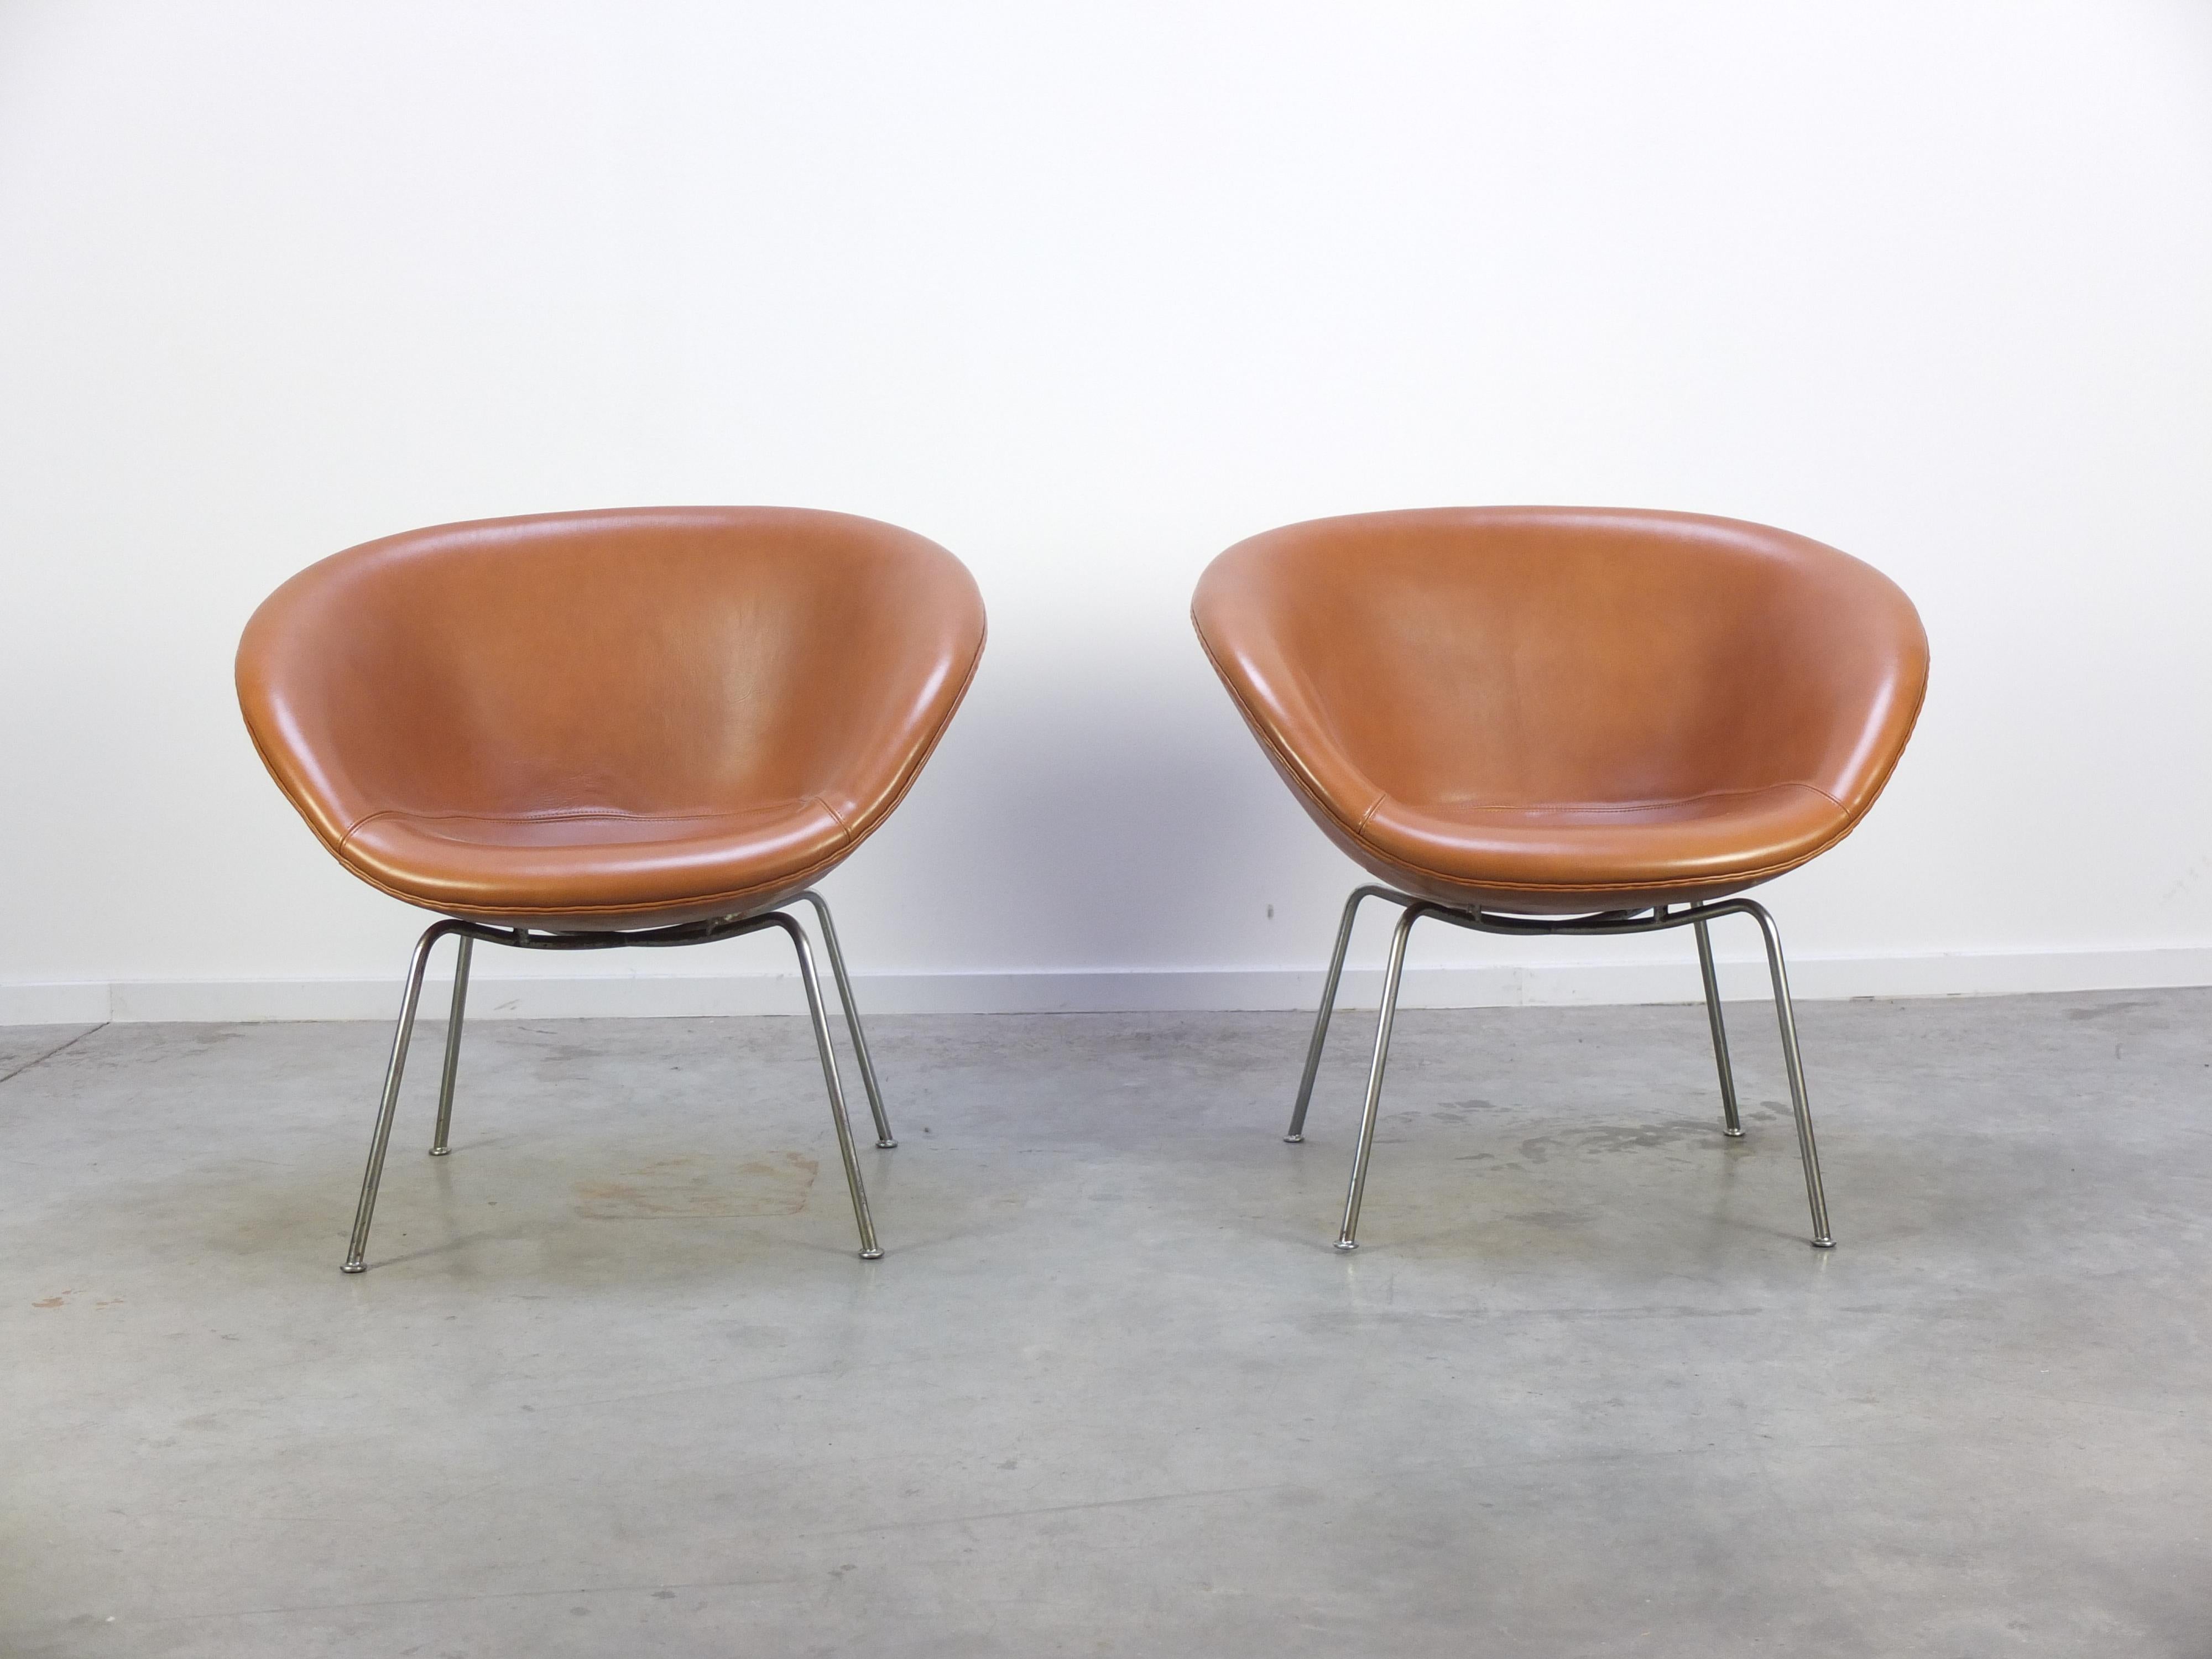 Fantastic pair of ‘Pot’ chairs designed by Arne Jacobsen for the Royal SAS Hotel in Copenhagen in 1959. These are early editions which have been professionally reupholstered with beautiful cognac-brown leather. The 4-legged base is made out of